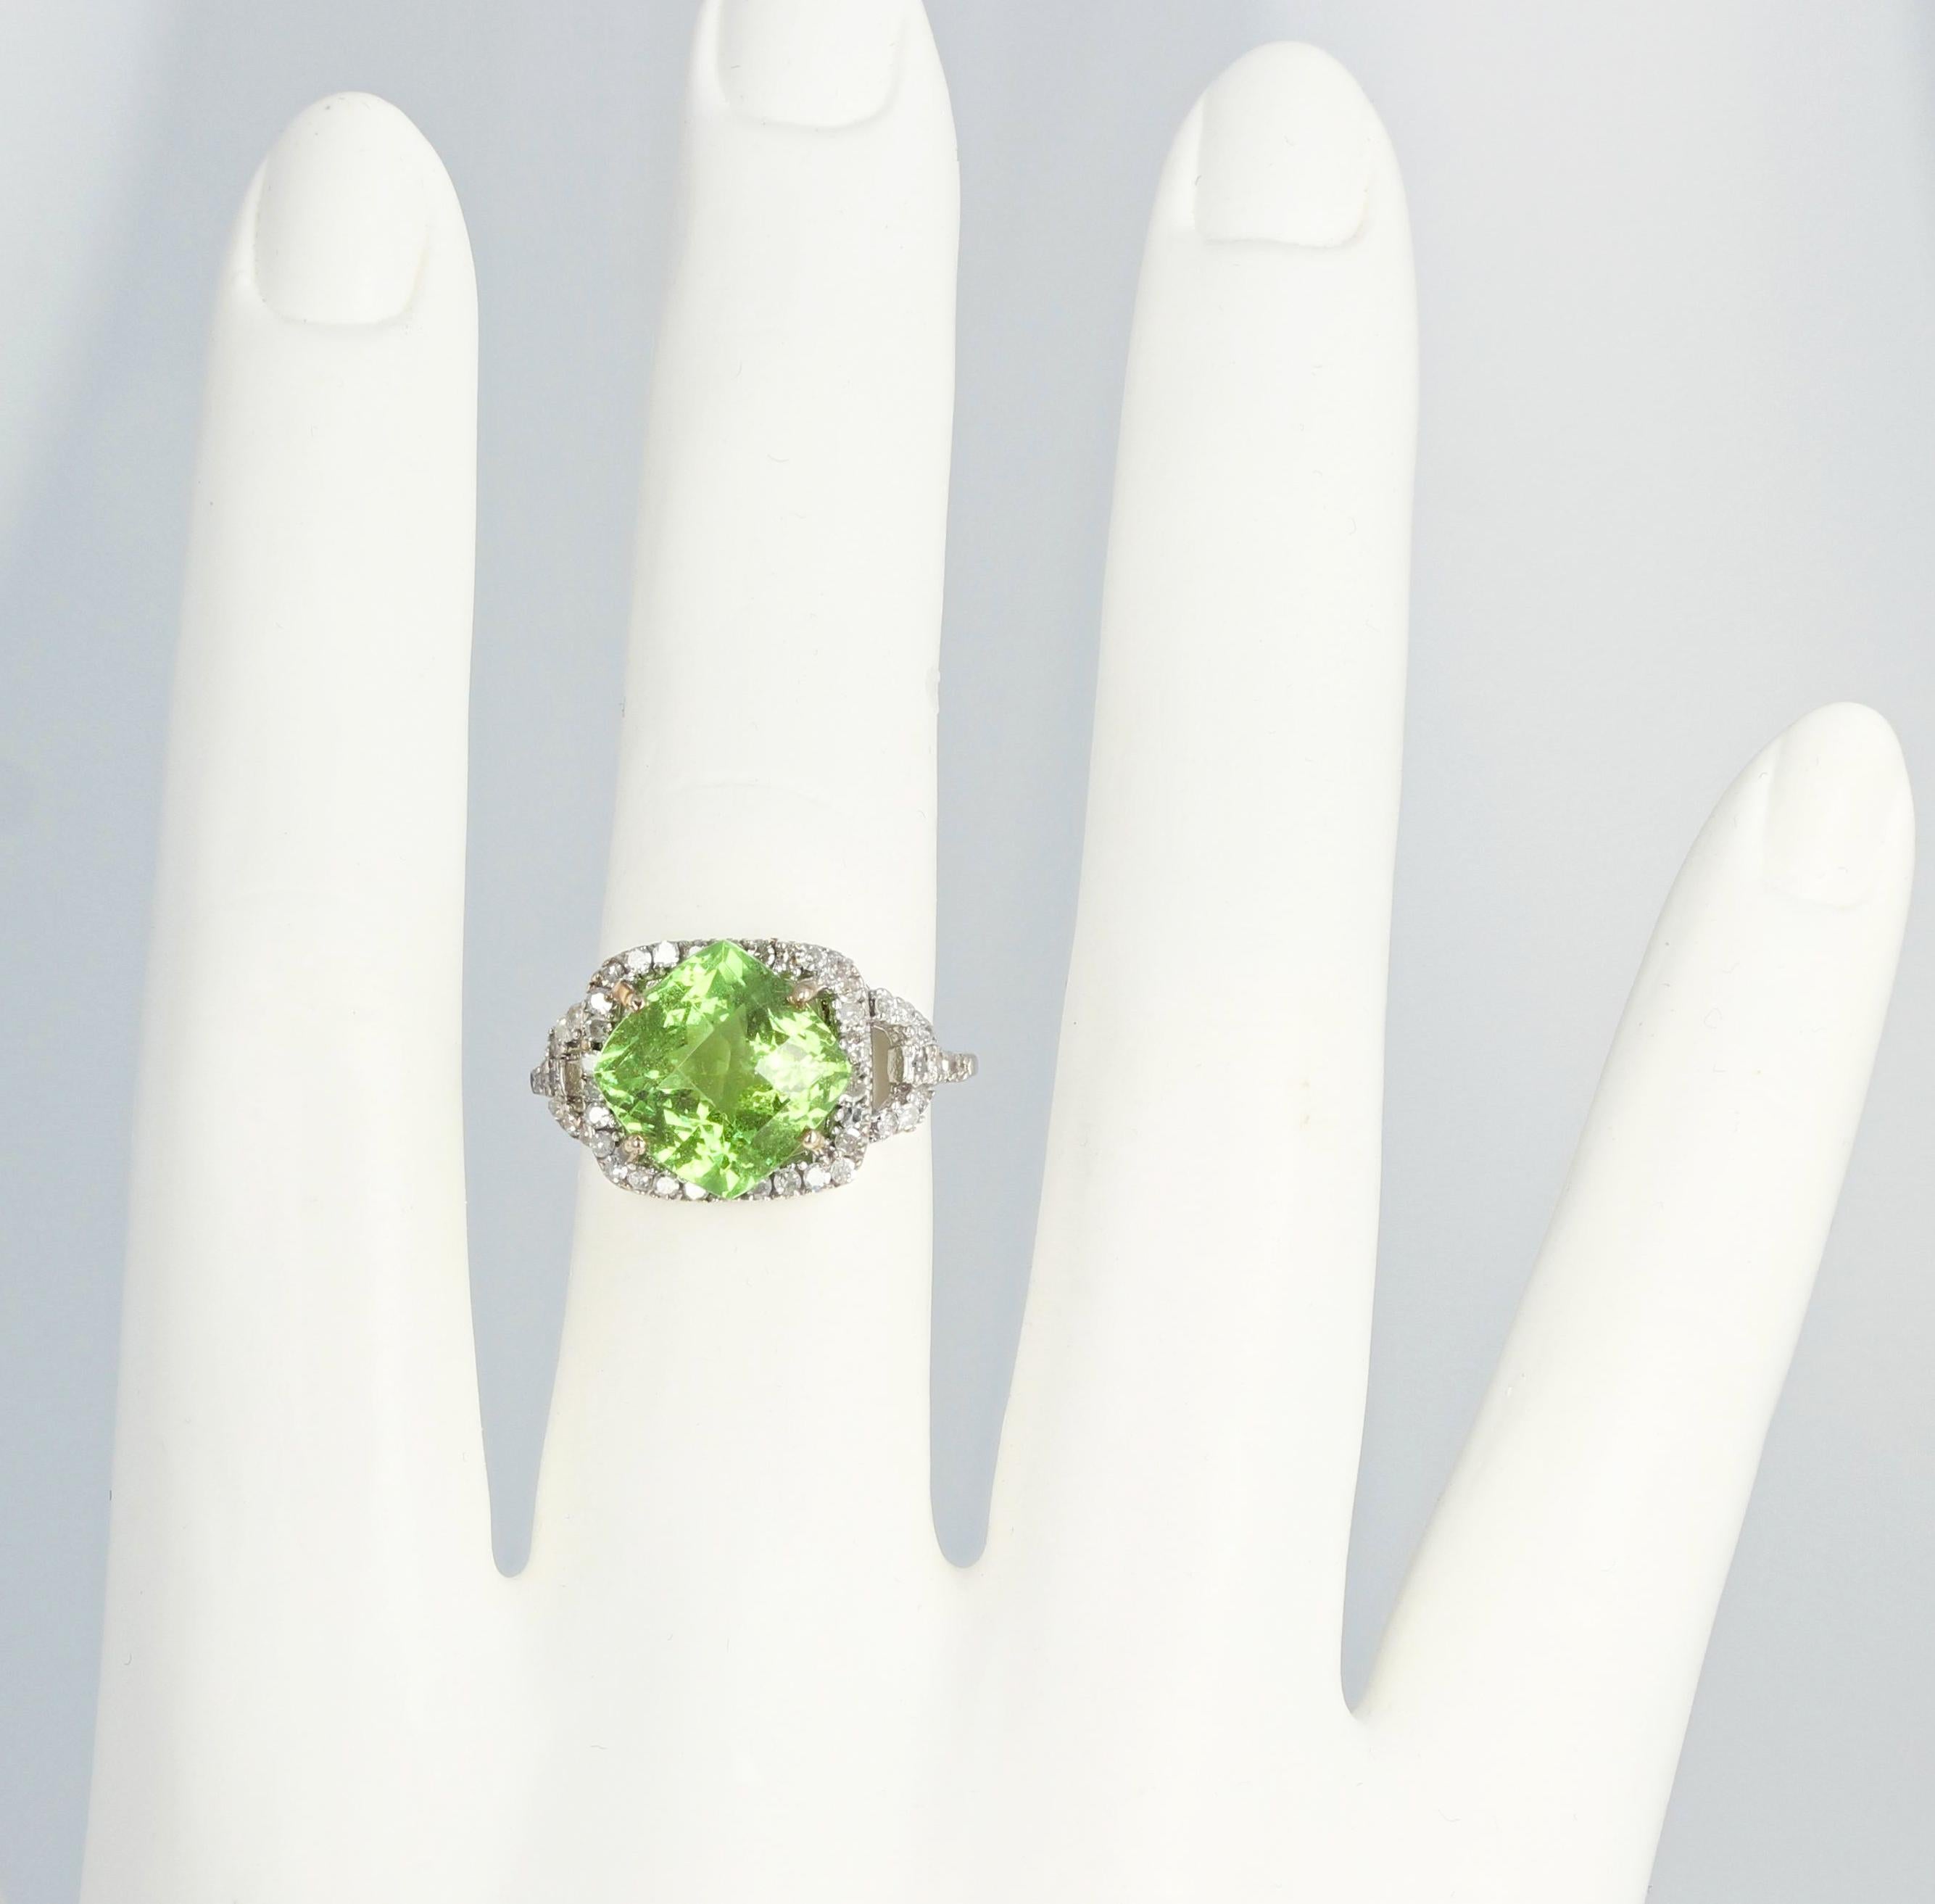 Glittering brilliant clear checkerboard cushion cut 4.5 carat green Tourmaline (10 mm x 10 mm) set in a unique 10kt white gold ring enhanced with .40 carats of White Diamonds.  The ring is a size 7 (sizable FOR FREE).  